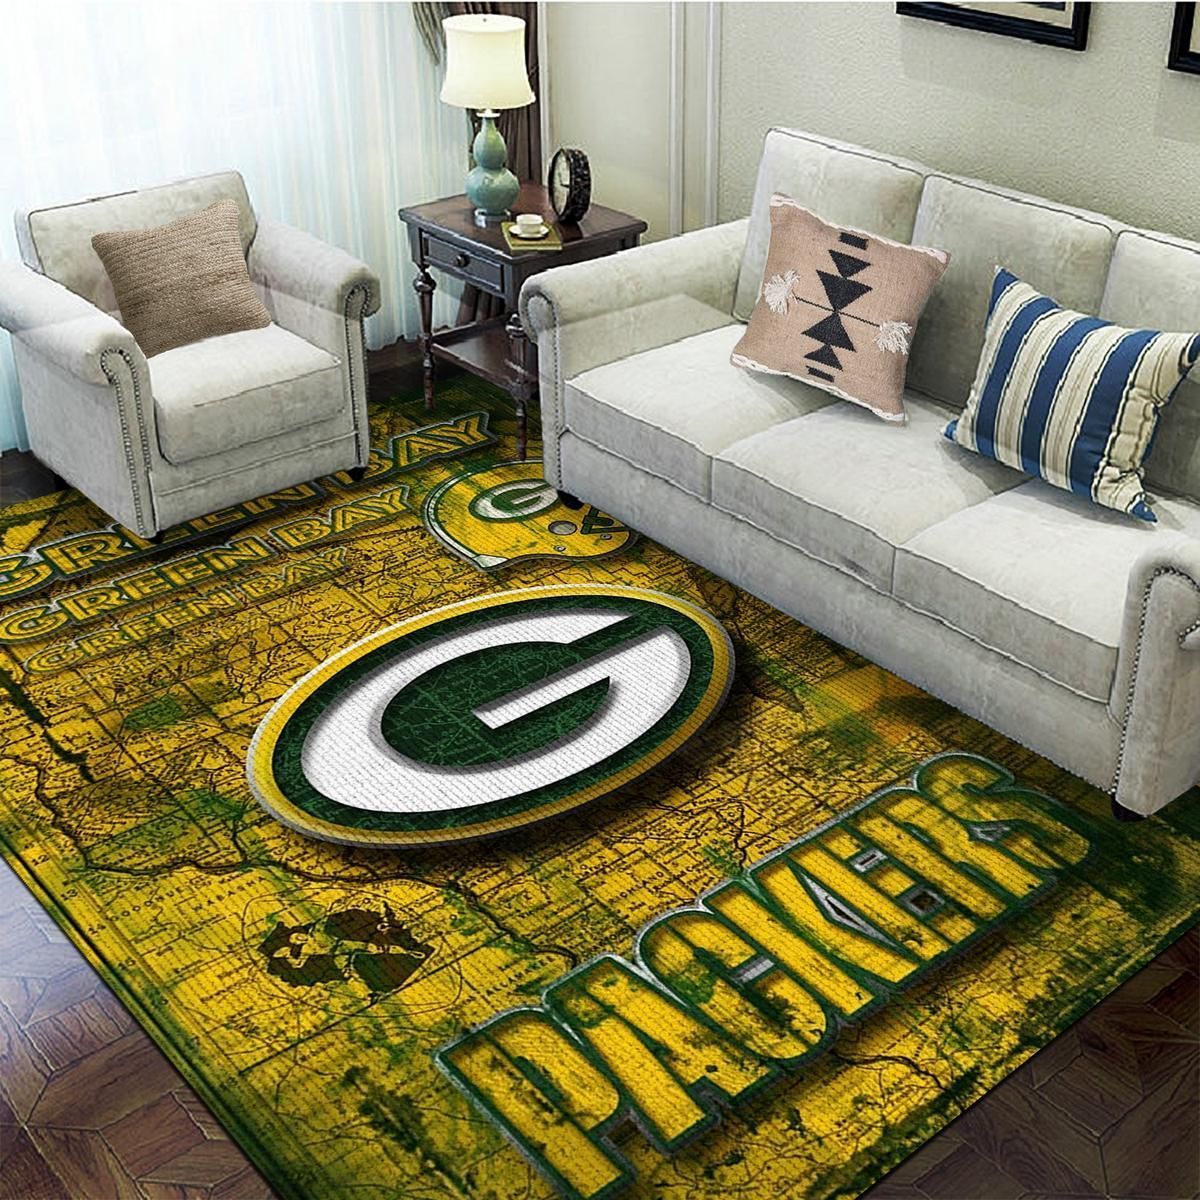 Green Bay Packers Football Team Area Rug For Christmas Bedroom Rug Christmas Gift US Decor - Indoor Outdoor Rugs